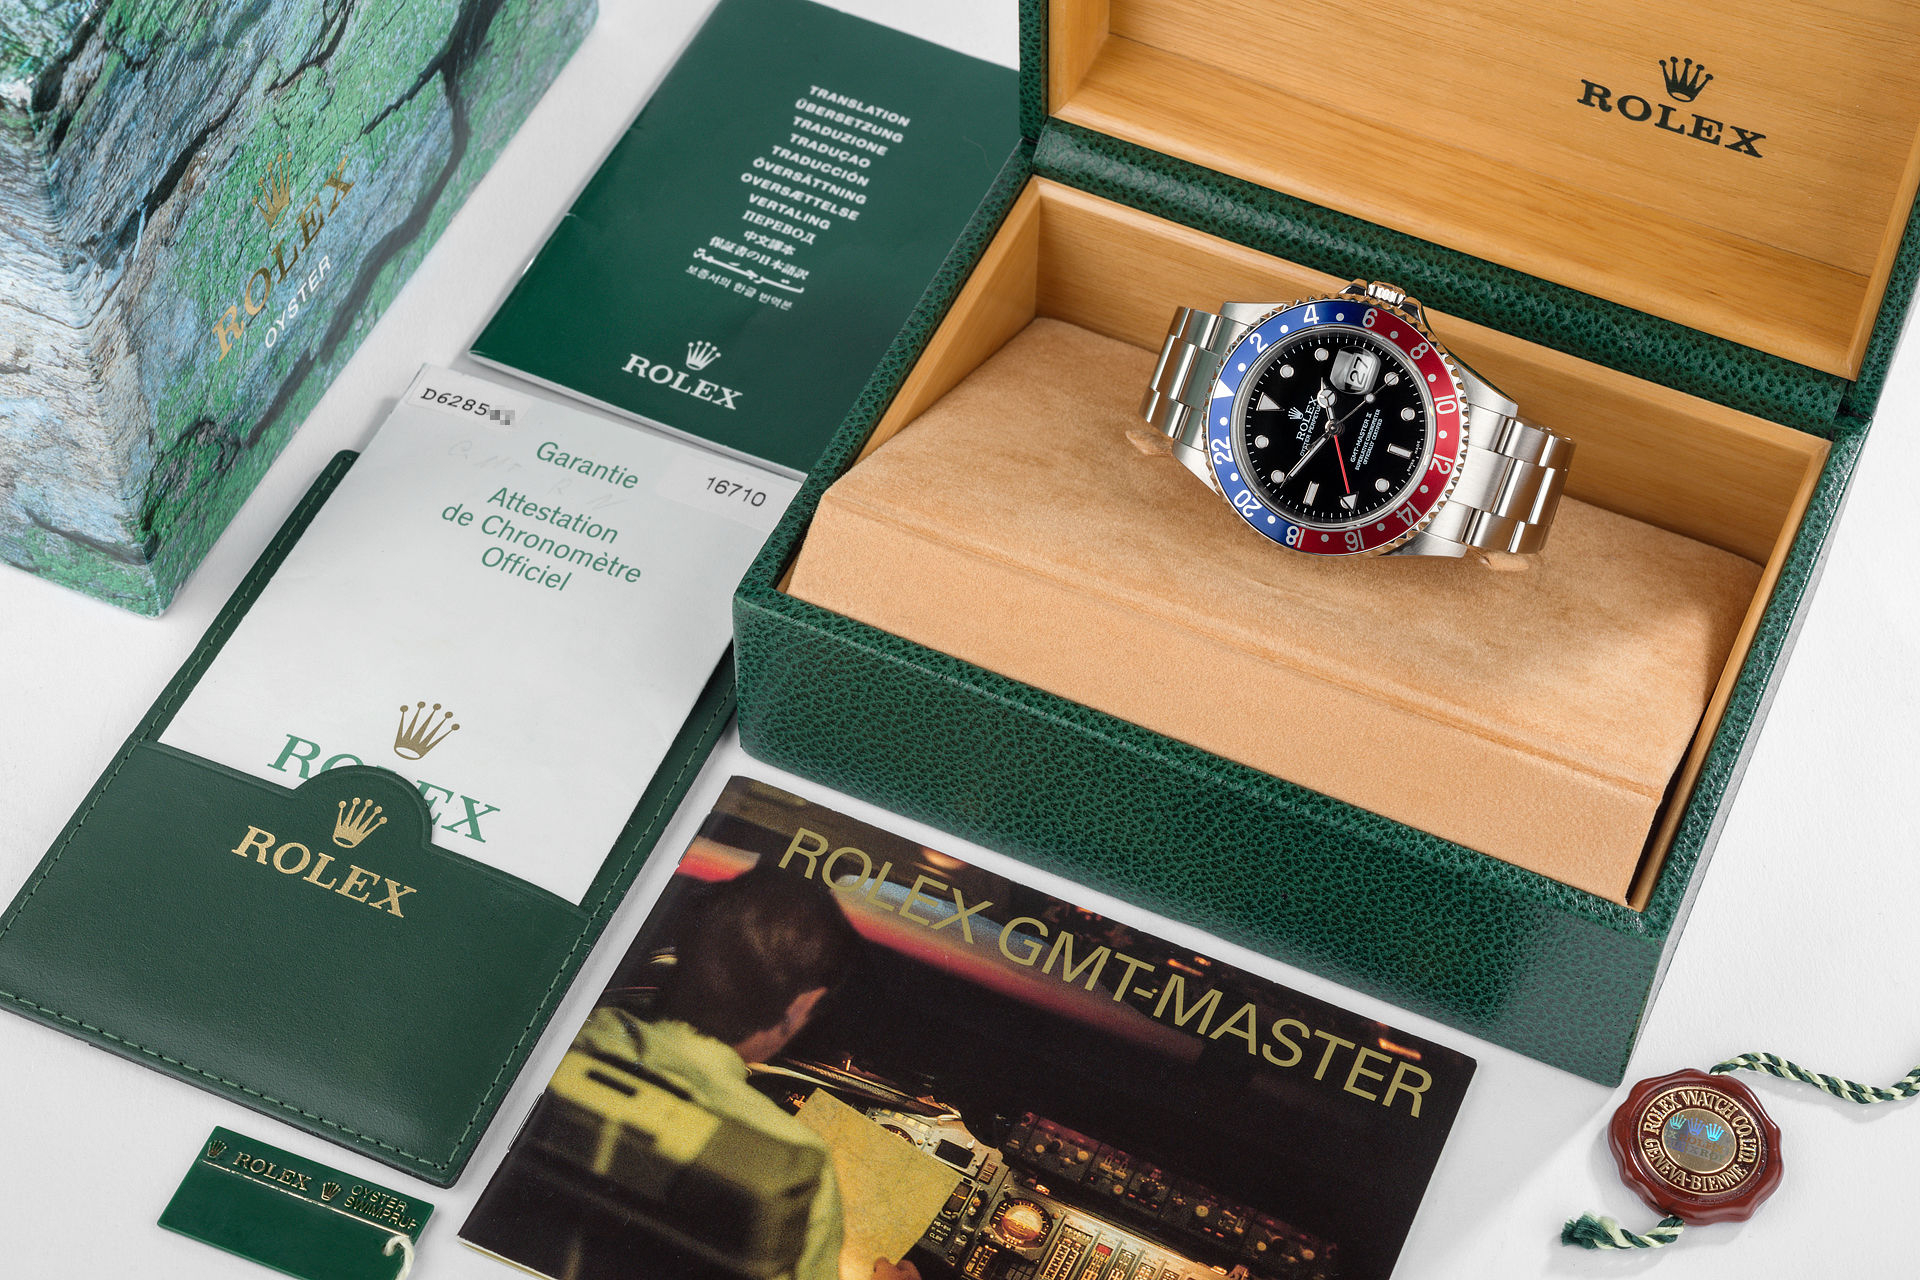 ref 16710 | Complete With Box & Papers | Rolex GMT-Master II